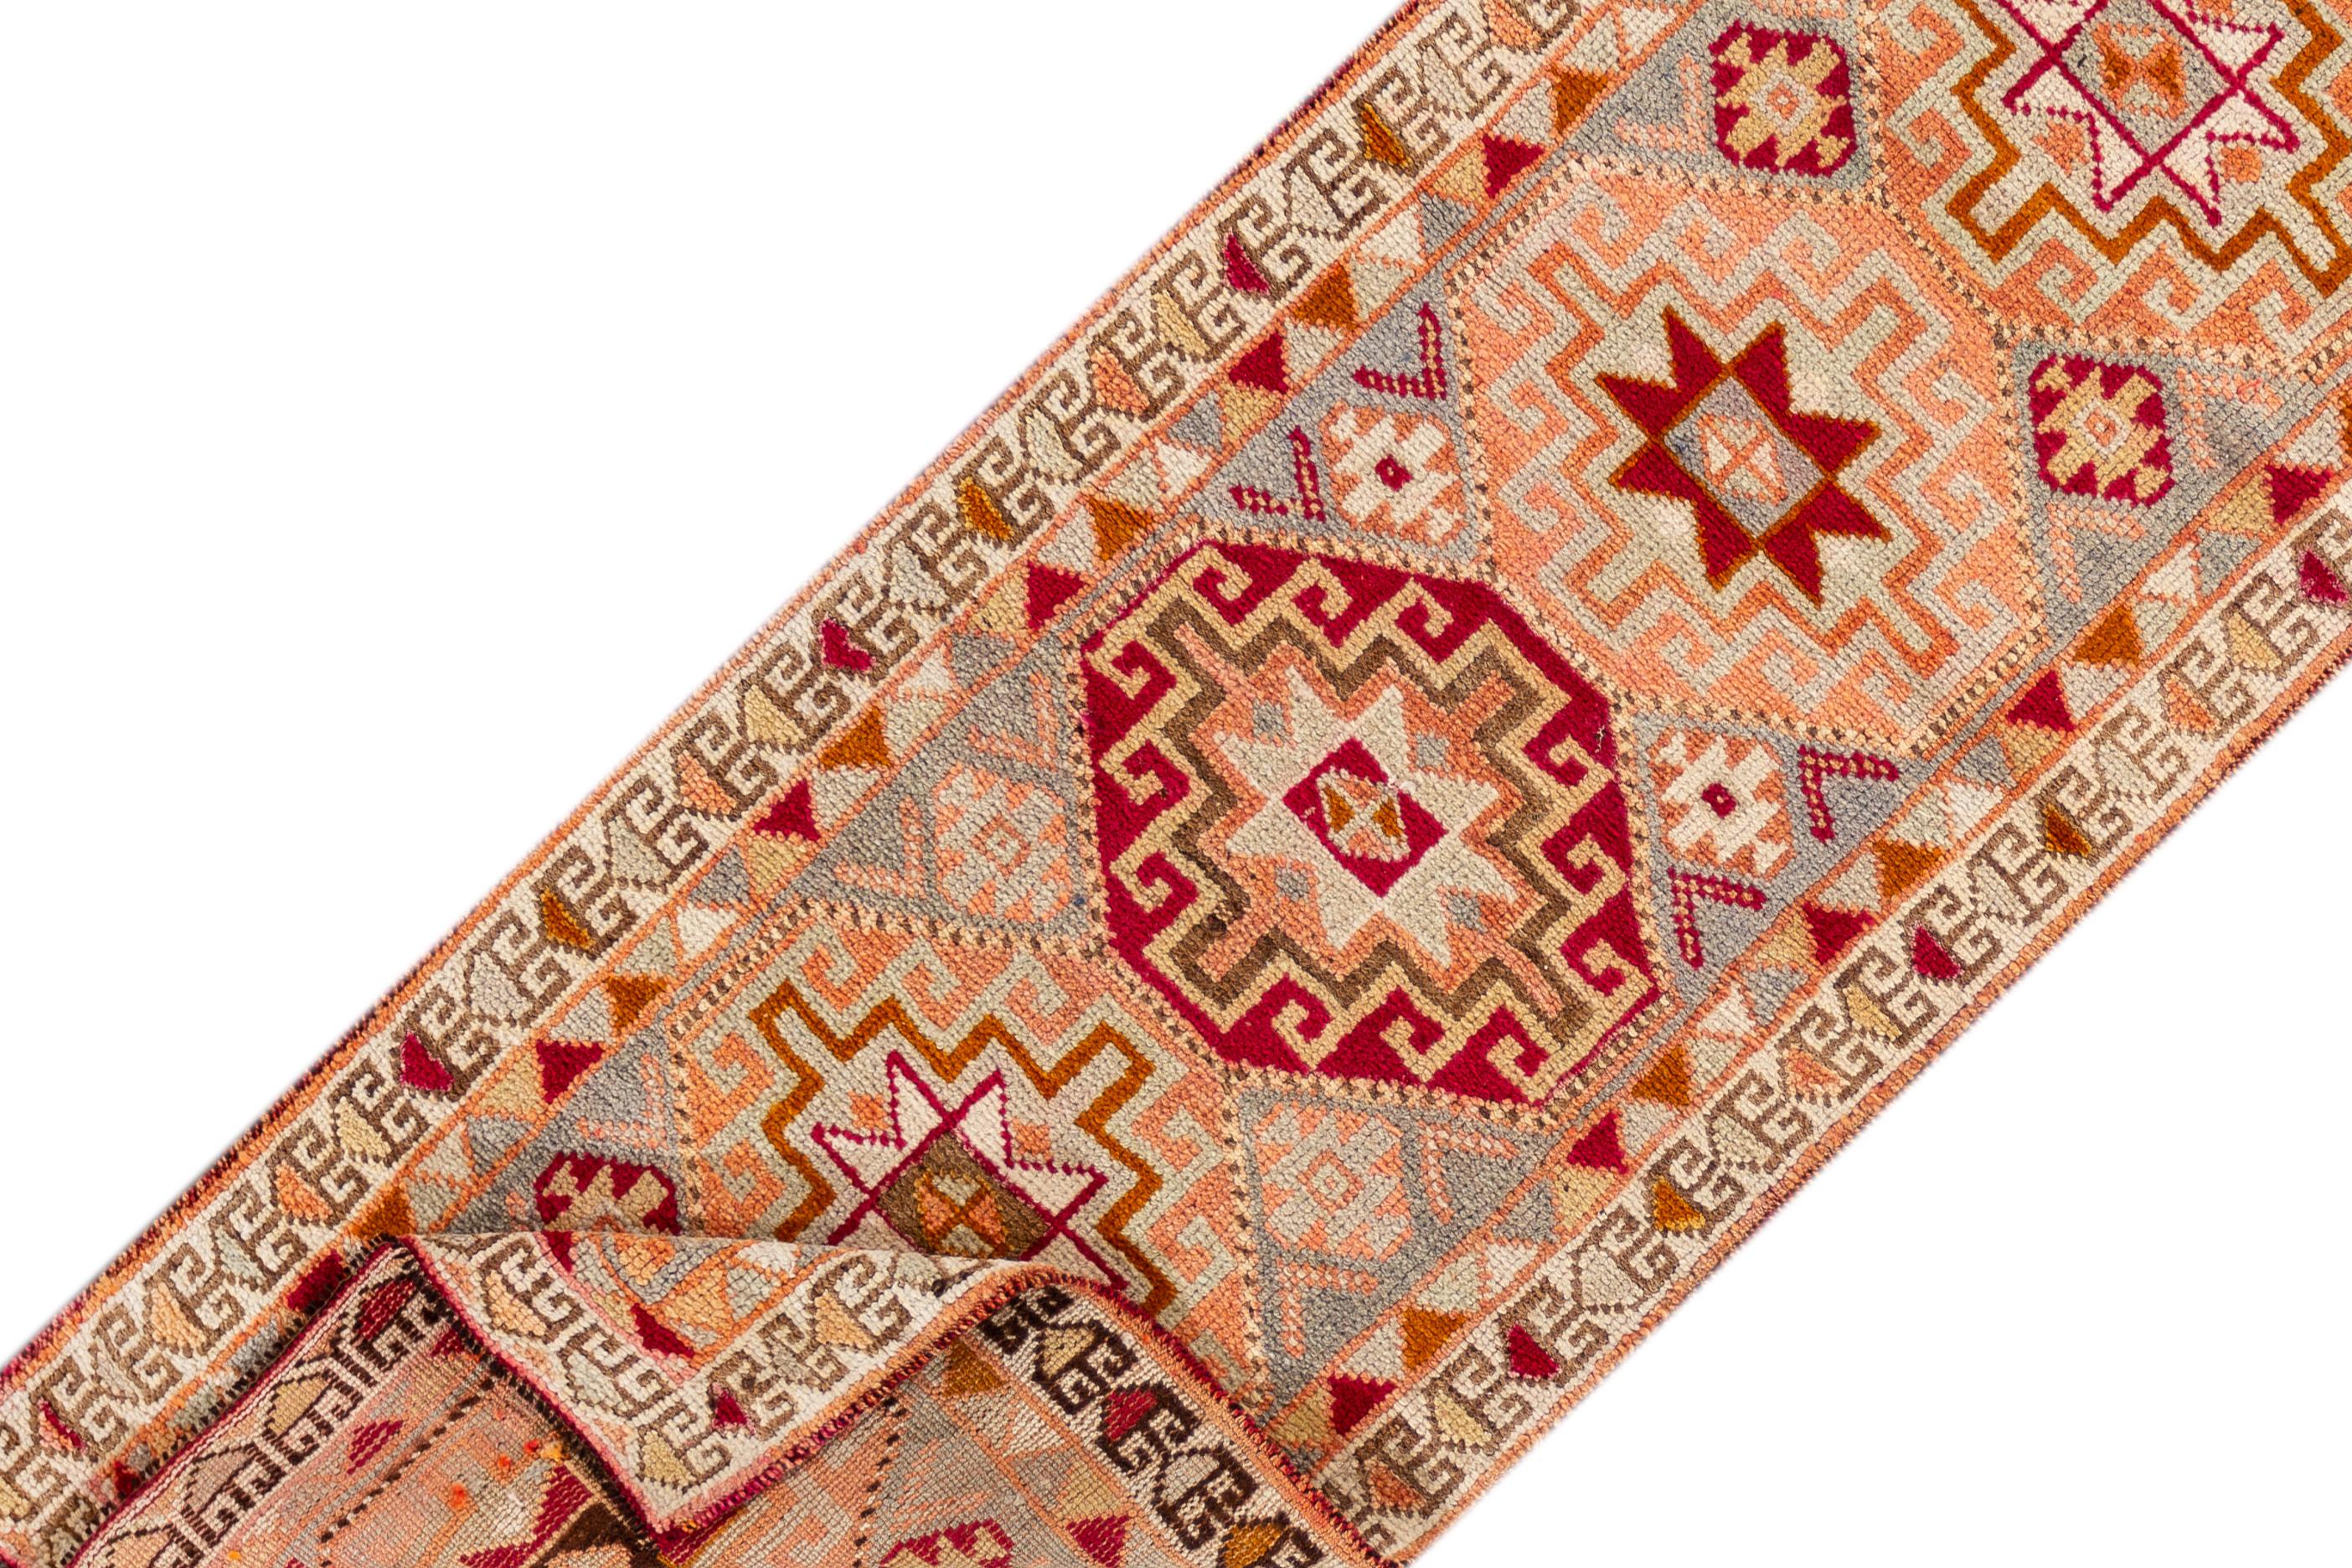 A 20th century vintage Turkish Anatolian runner rug with an all-over geometric orange motif. This rug measures at 3'1